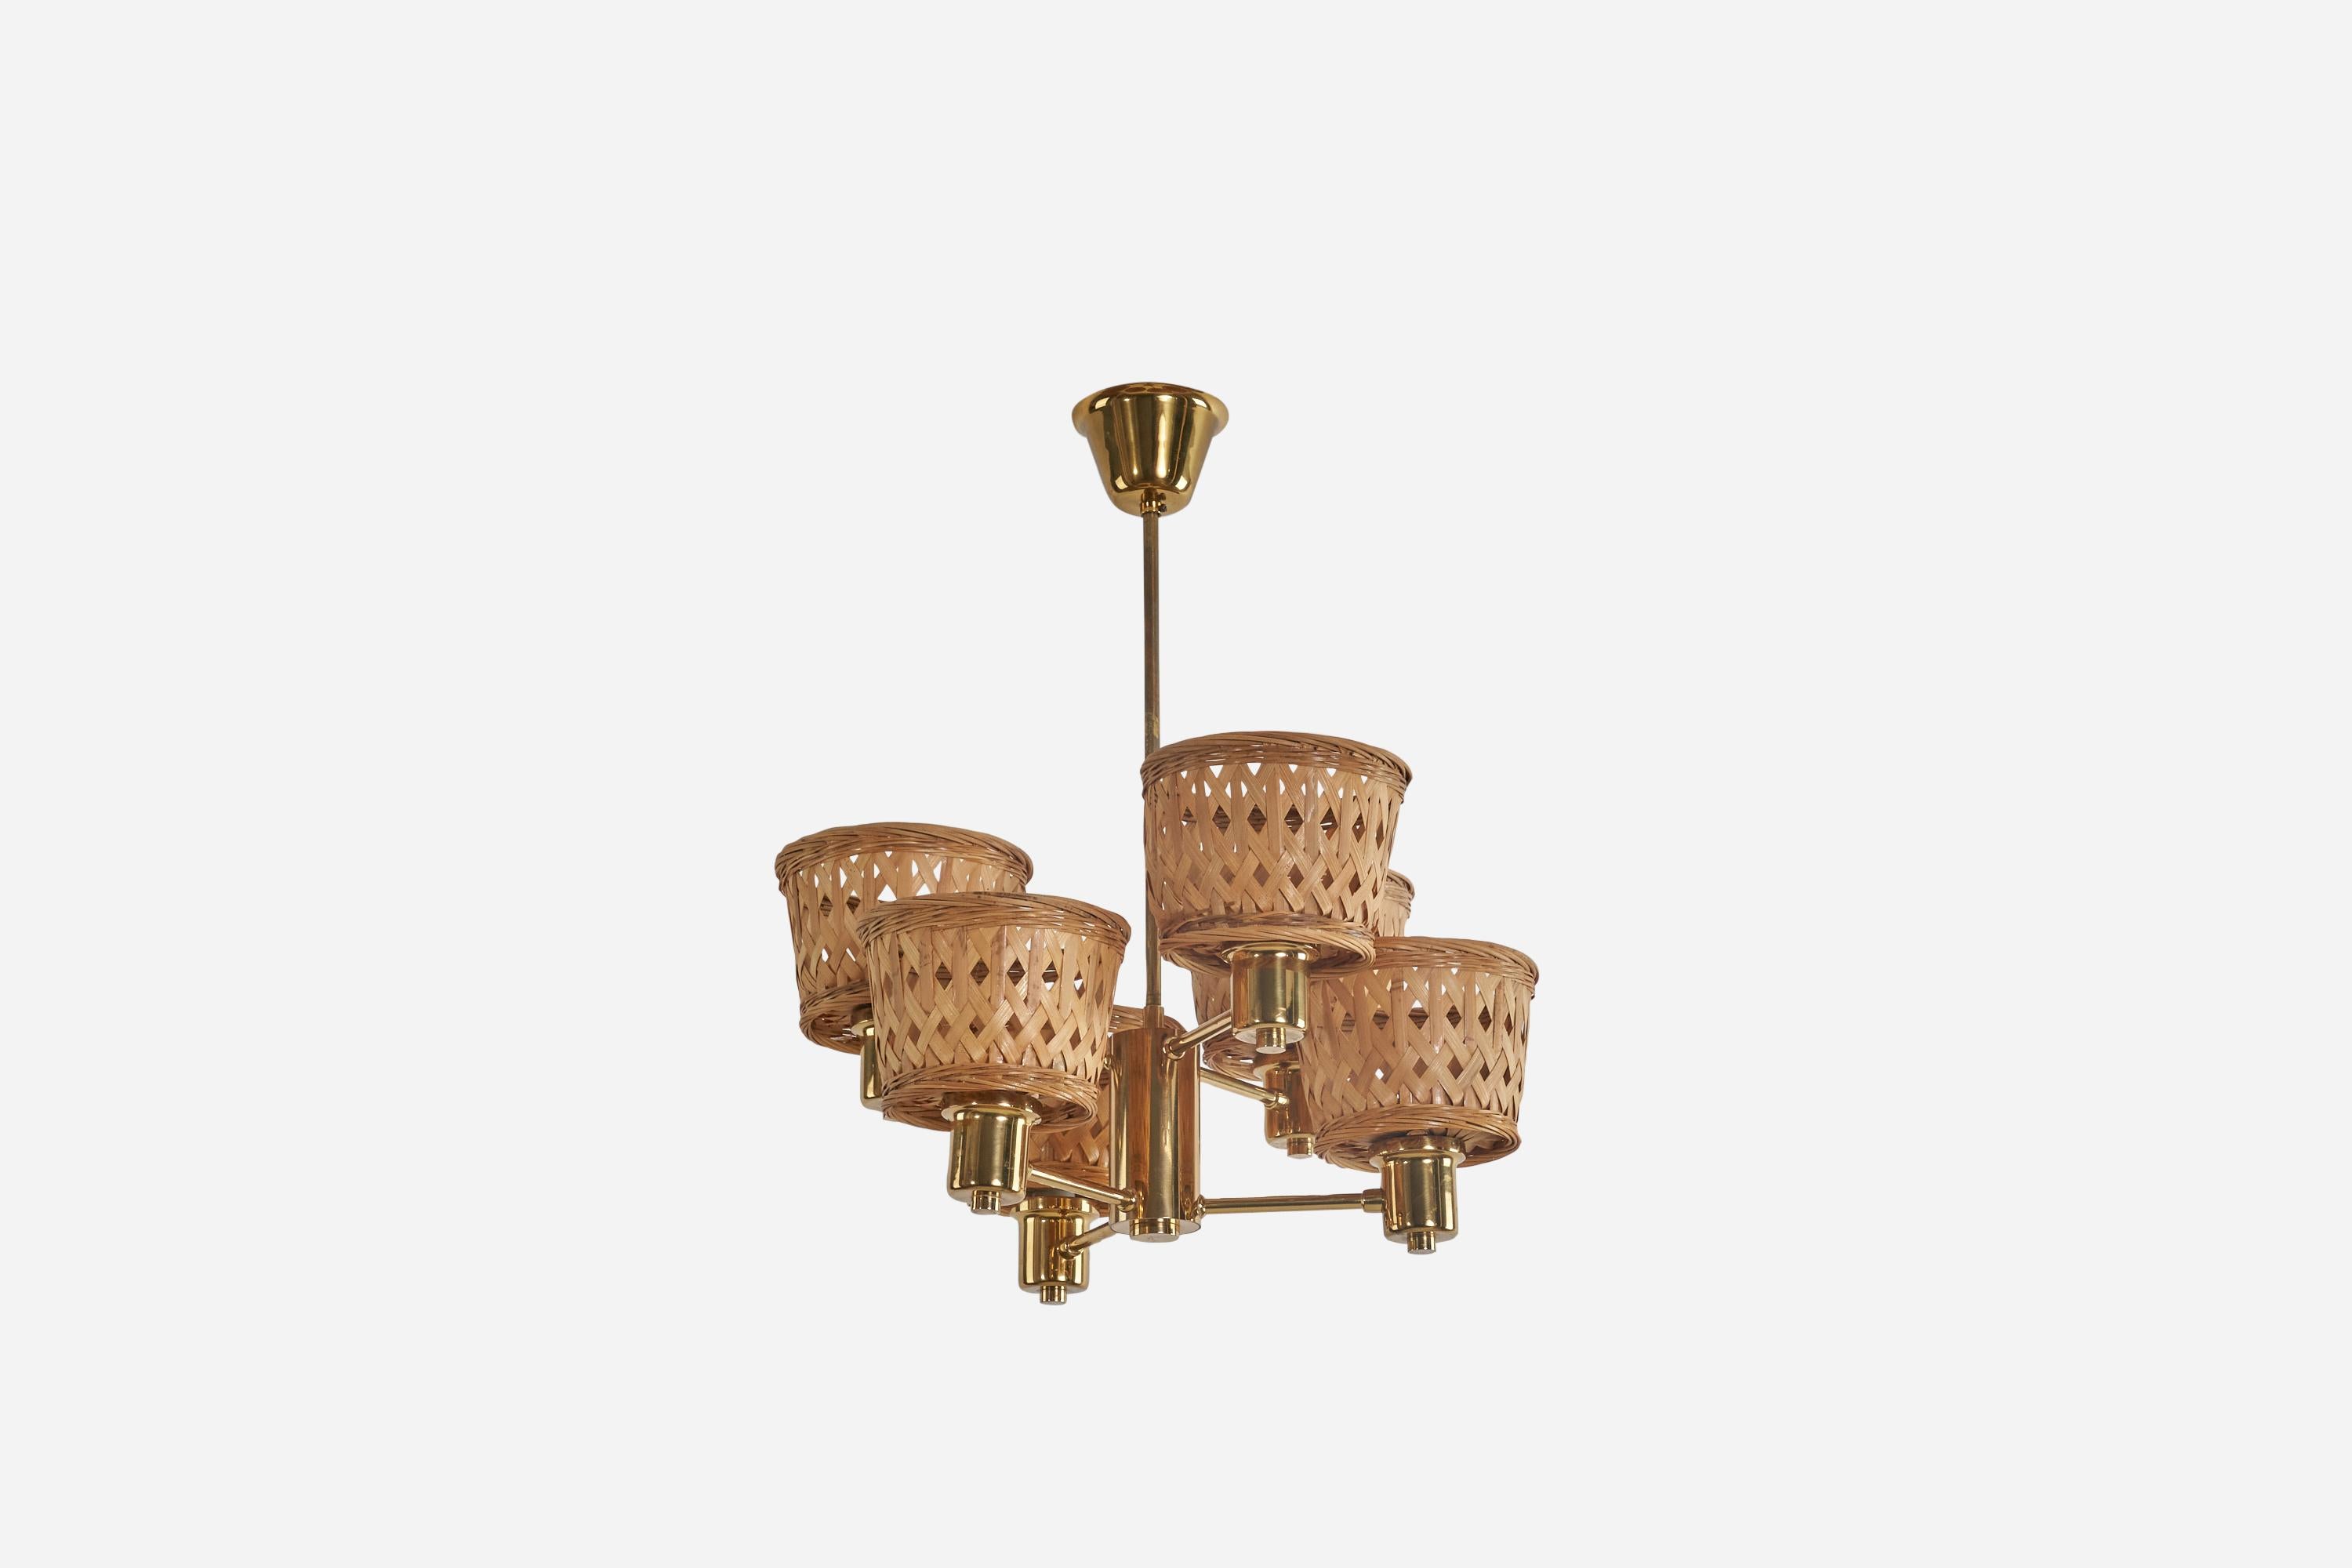 A brass and rattan chandelier designed and produced by Hans-Agne Jakobsson, Sweden, 1960s.

Sold with Lampshade(s). 
Stated dimensions refer to the Chandelier with the Shade(s).
Dimensions of Canopy (inches) : 2.4 x 3.94 x 3.94 (Height x Width x